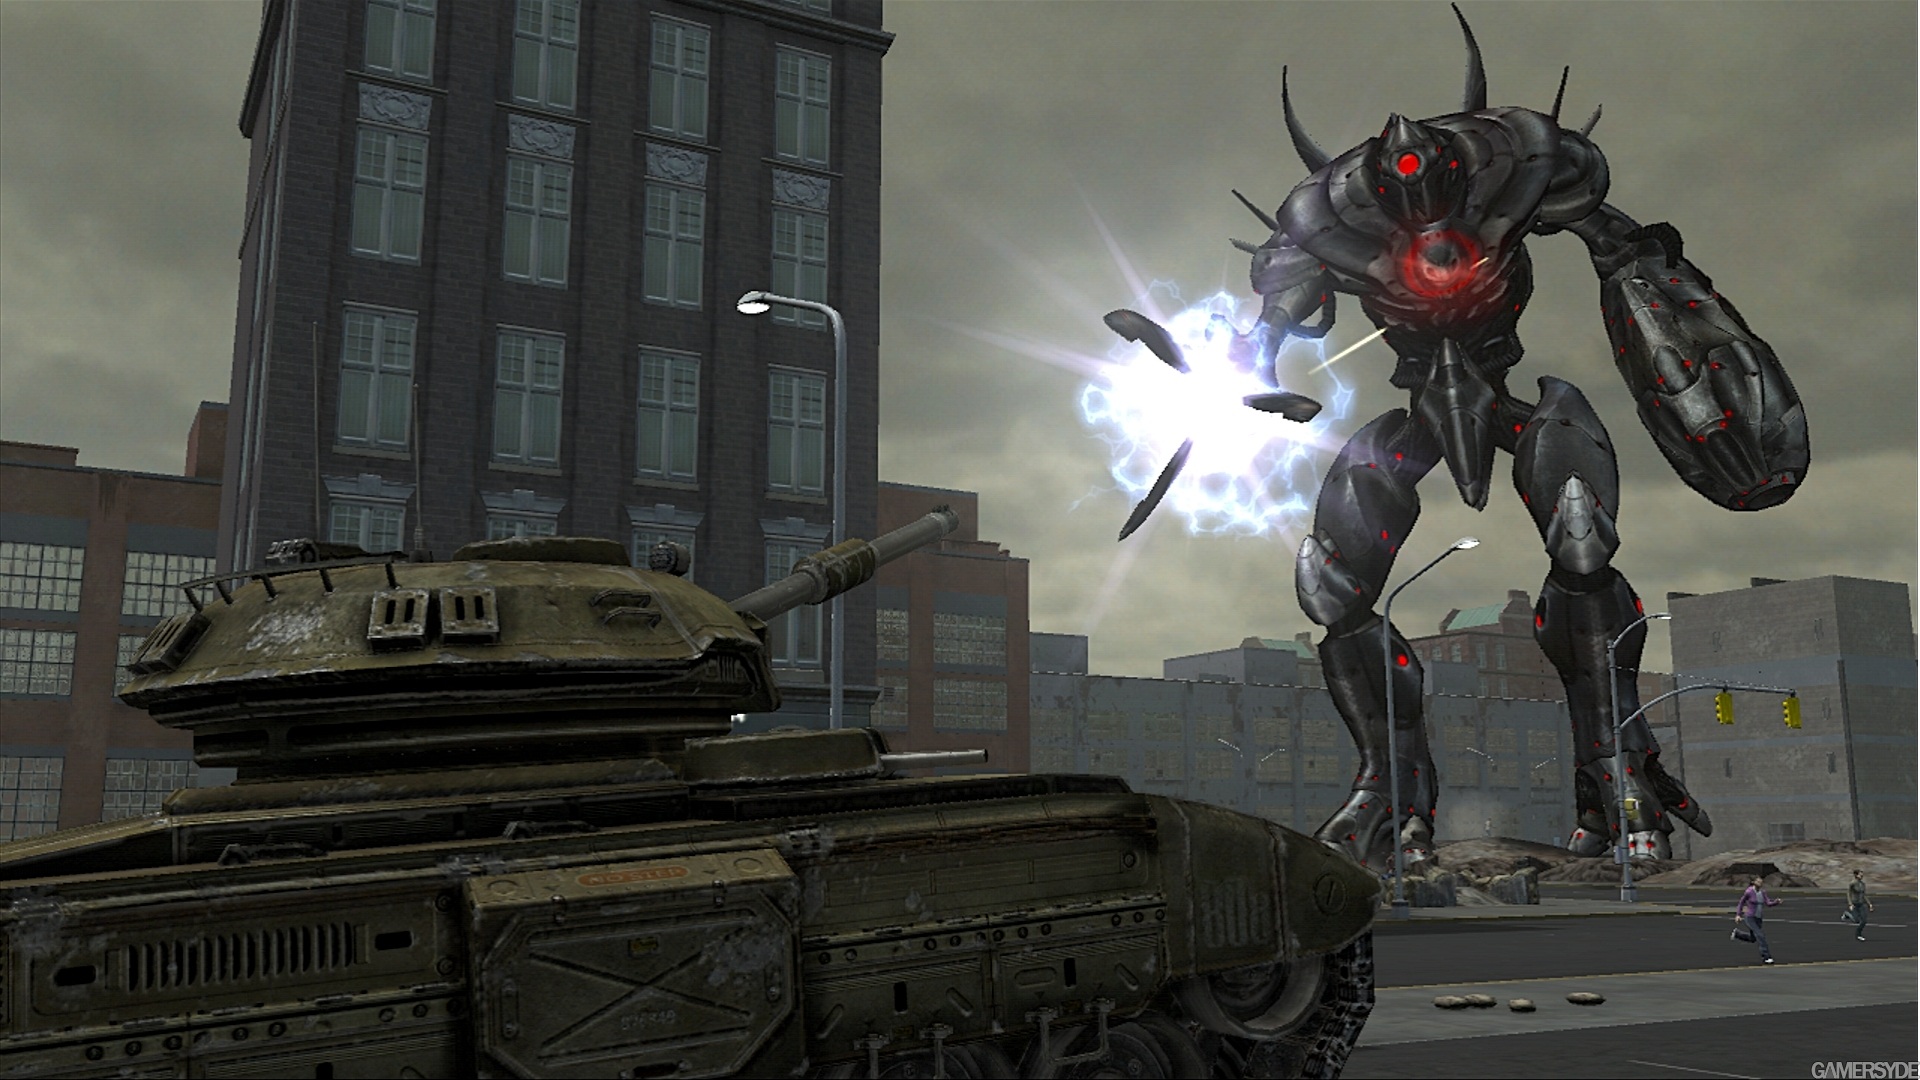 Earth Defense Force: Insect Armageddon the game